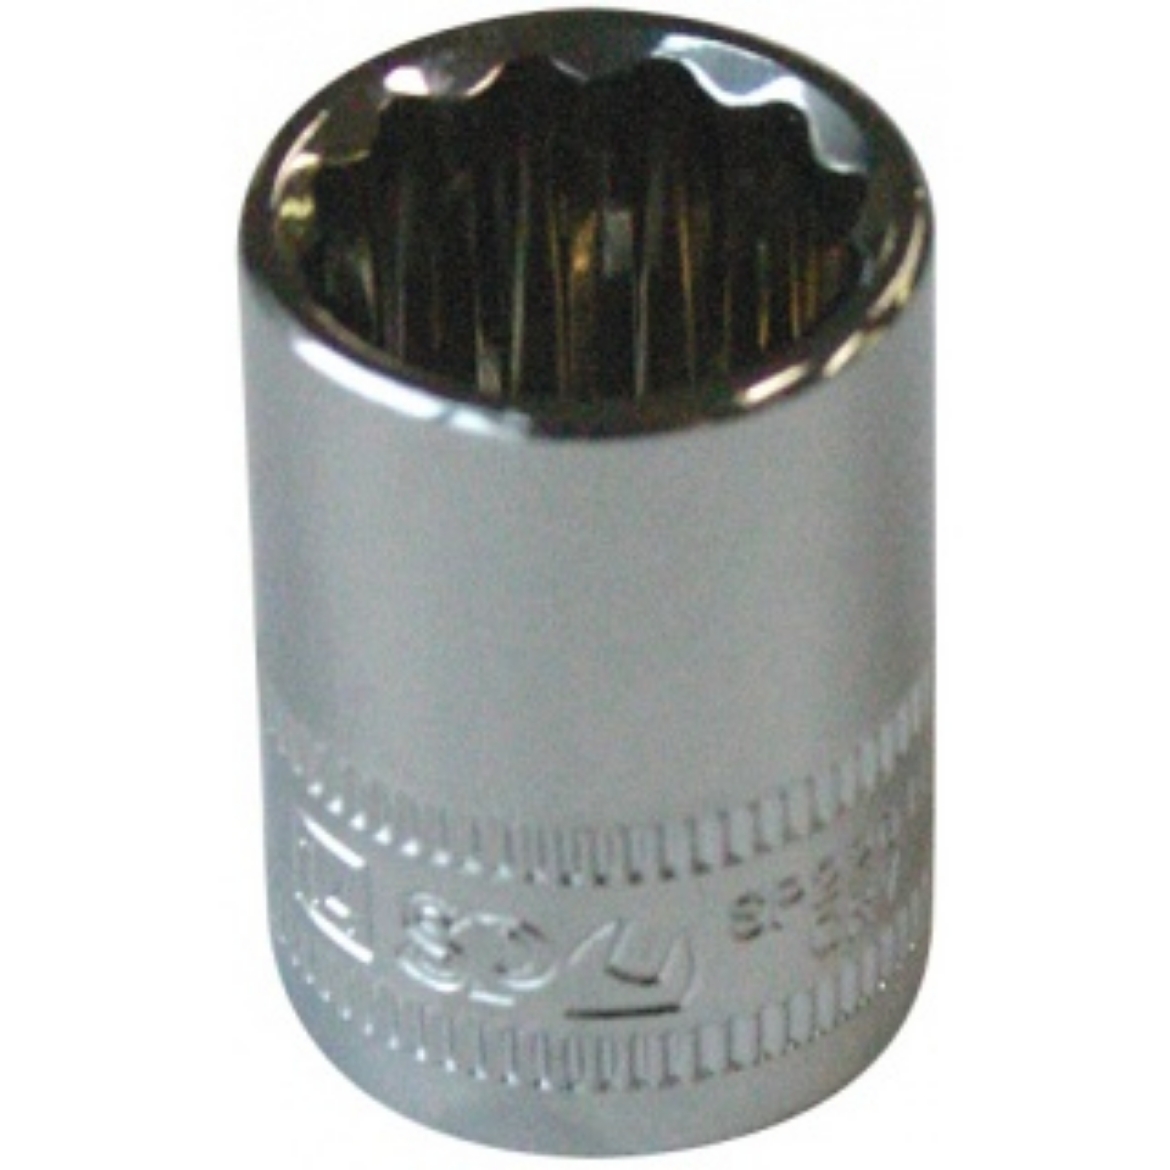 Picture of SOCKET 3/8"DR 12PT METRIC 21MM SP TOOLS